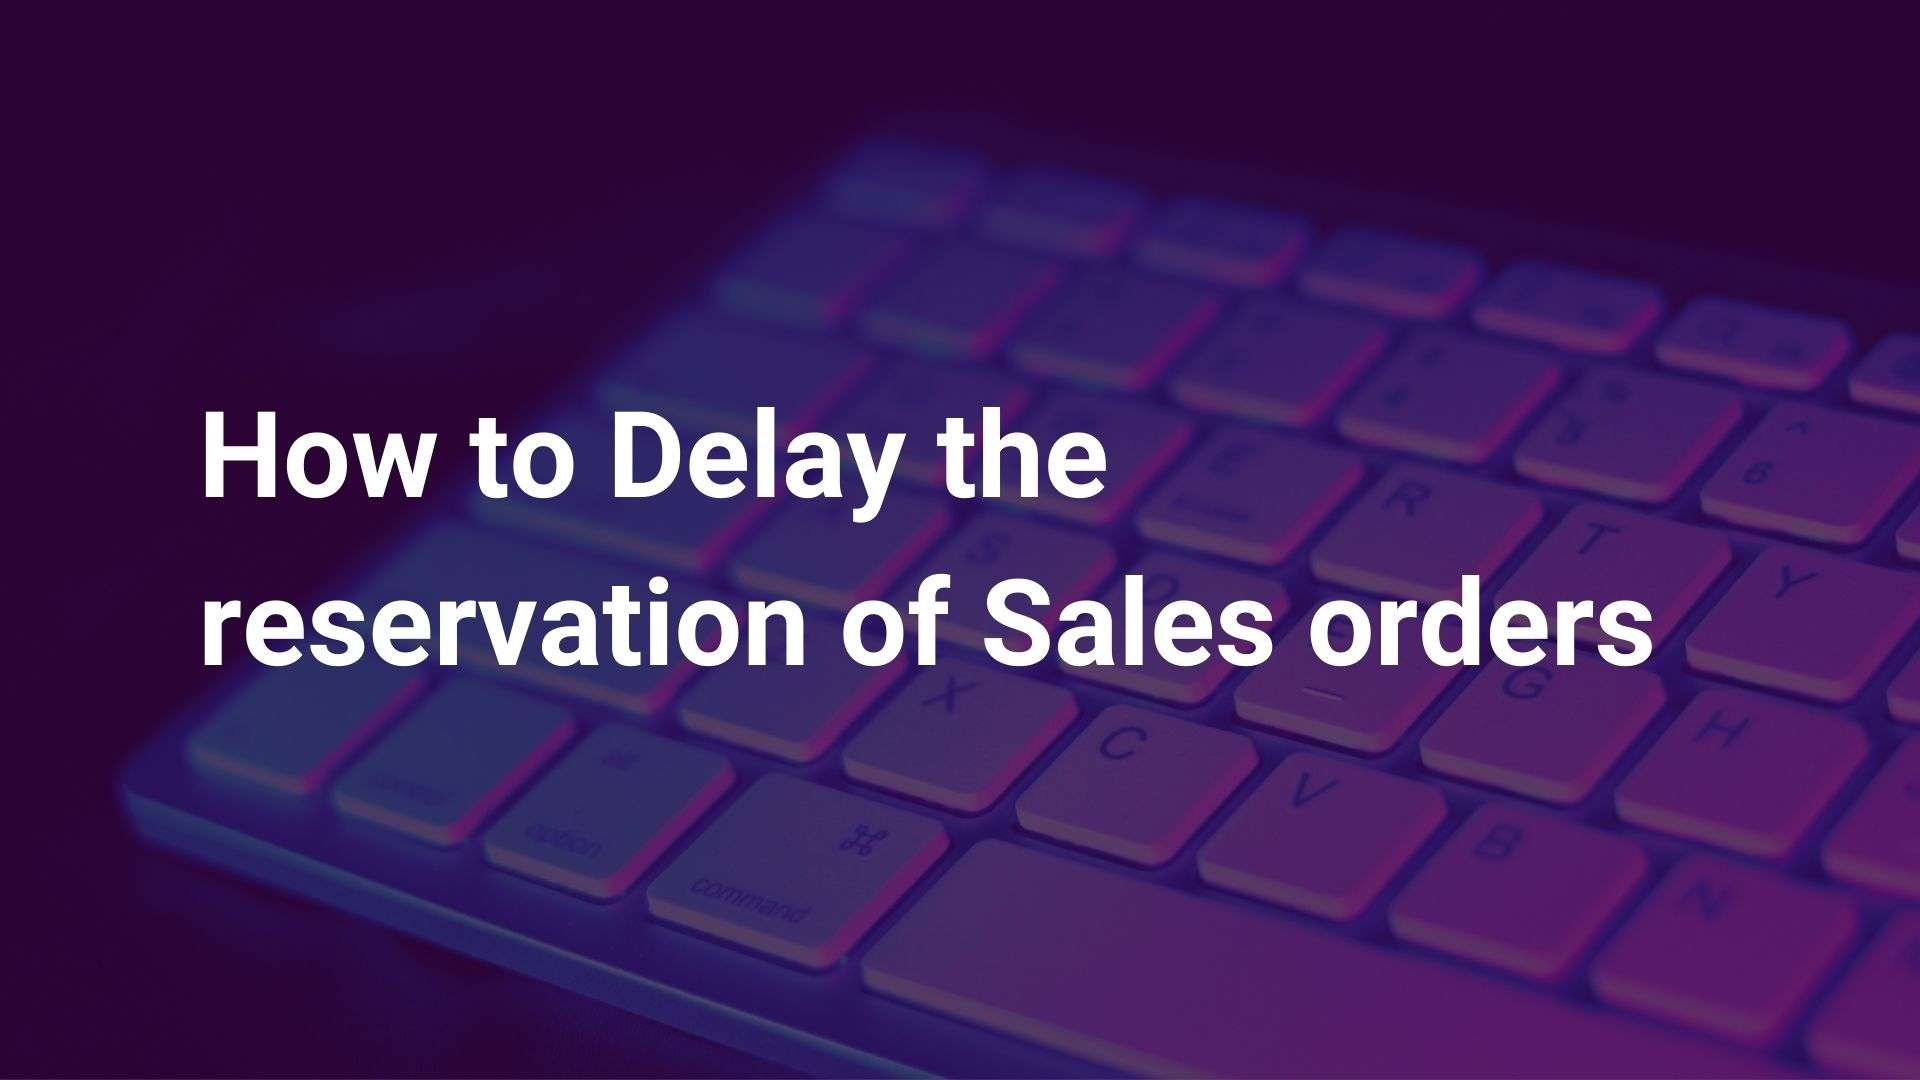 How to Delay the reservation of Sales orders Featured Image